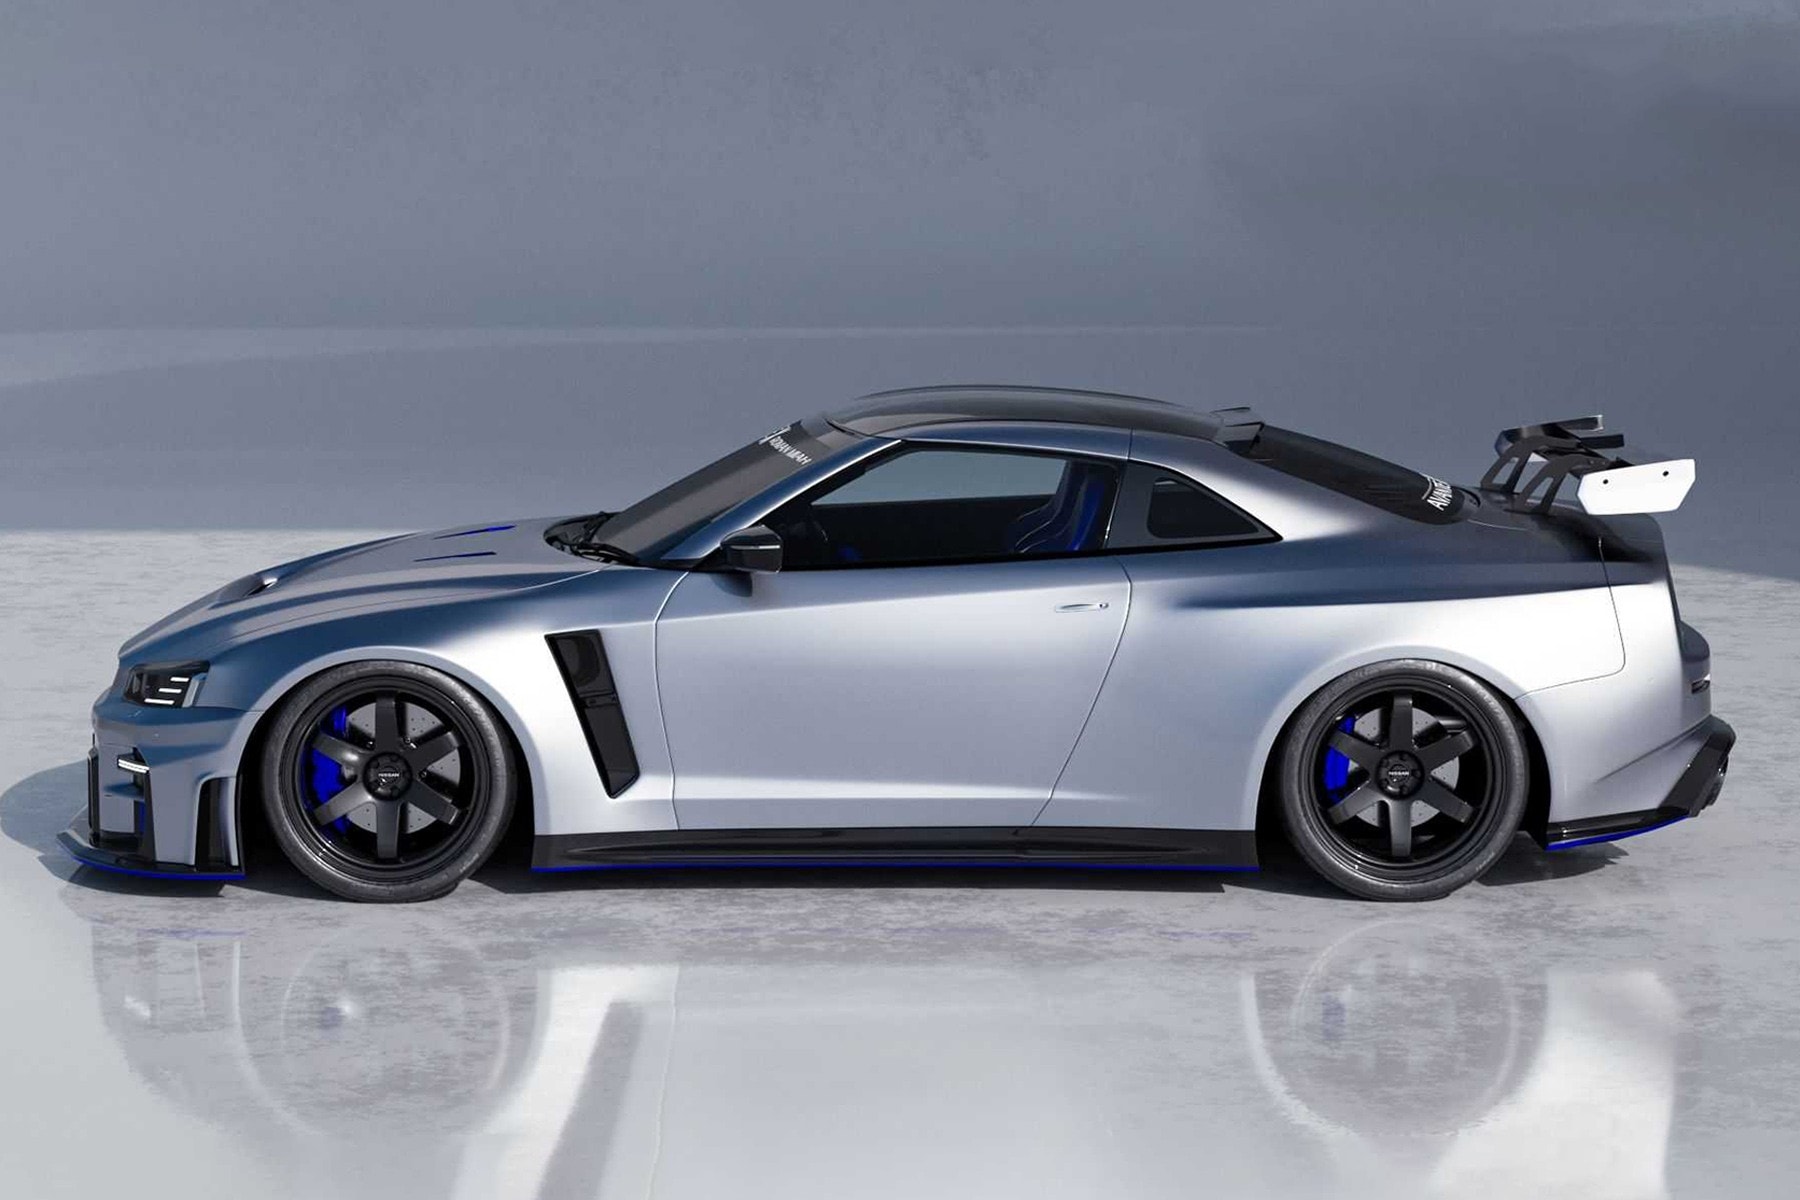 Automotive Designer Shows What He Thinks the R36 Nissan Skyline GT